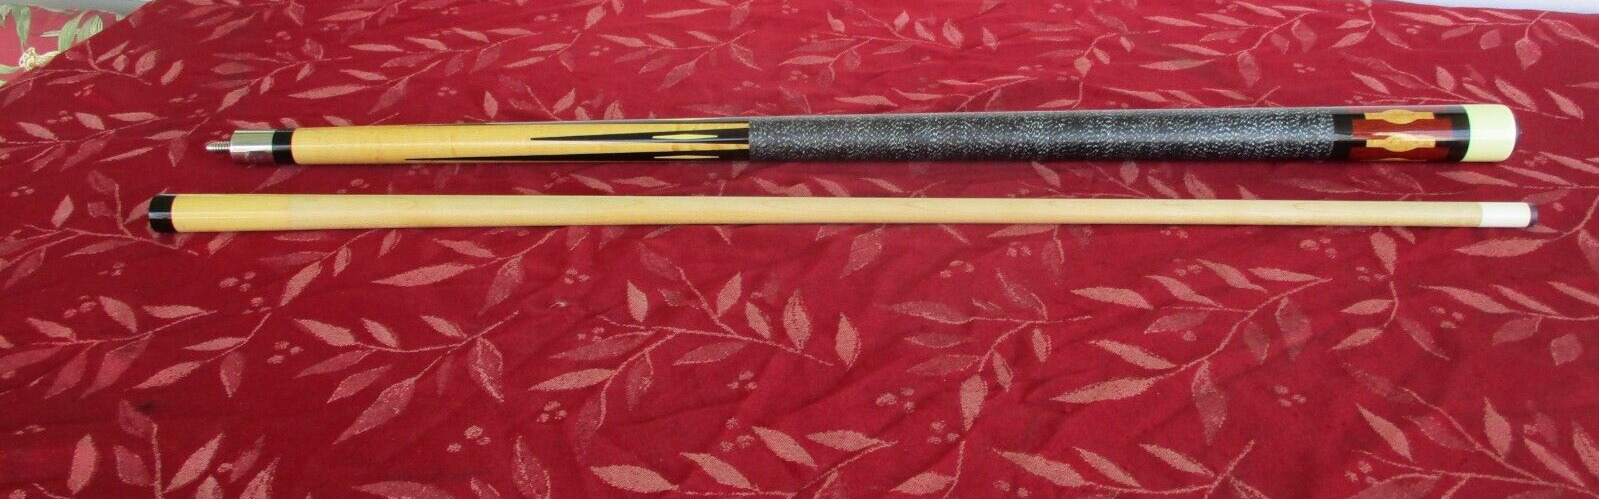 JOSS WILLIE MOSCONI SPECIAL LIMITED EDITION CUE POOL STICK COLLECTABLE RARE USED